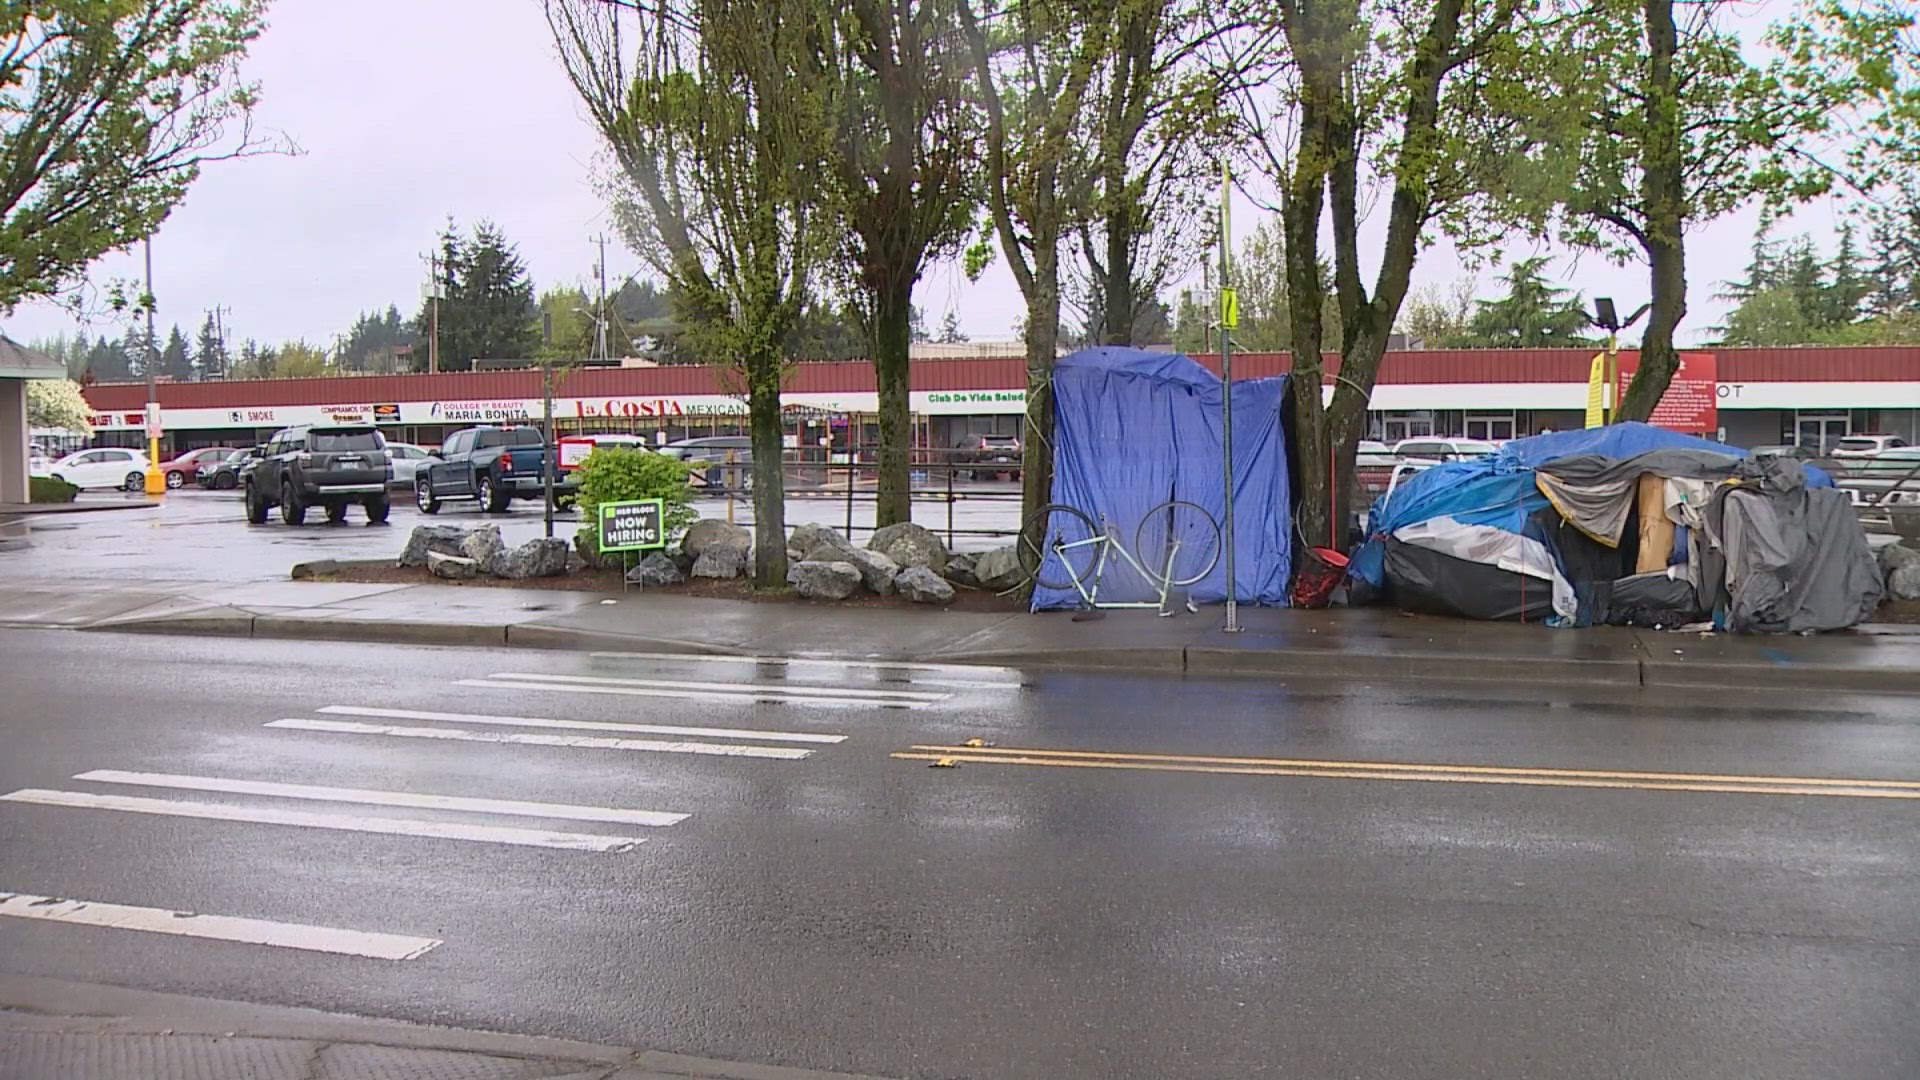 Burien initially was working with the county to use the shelters to address homelessness in the city.